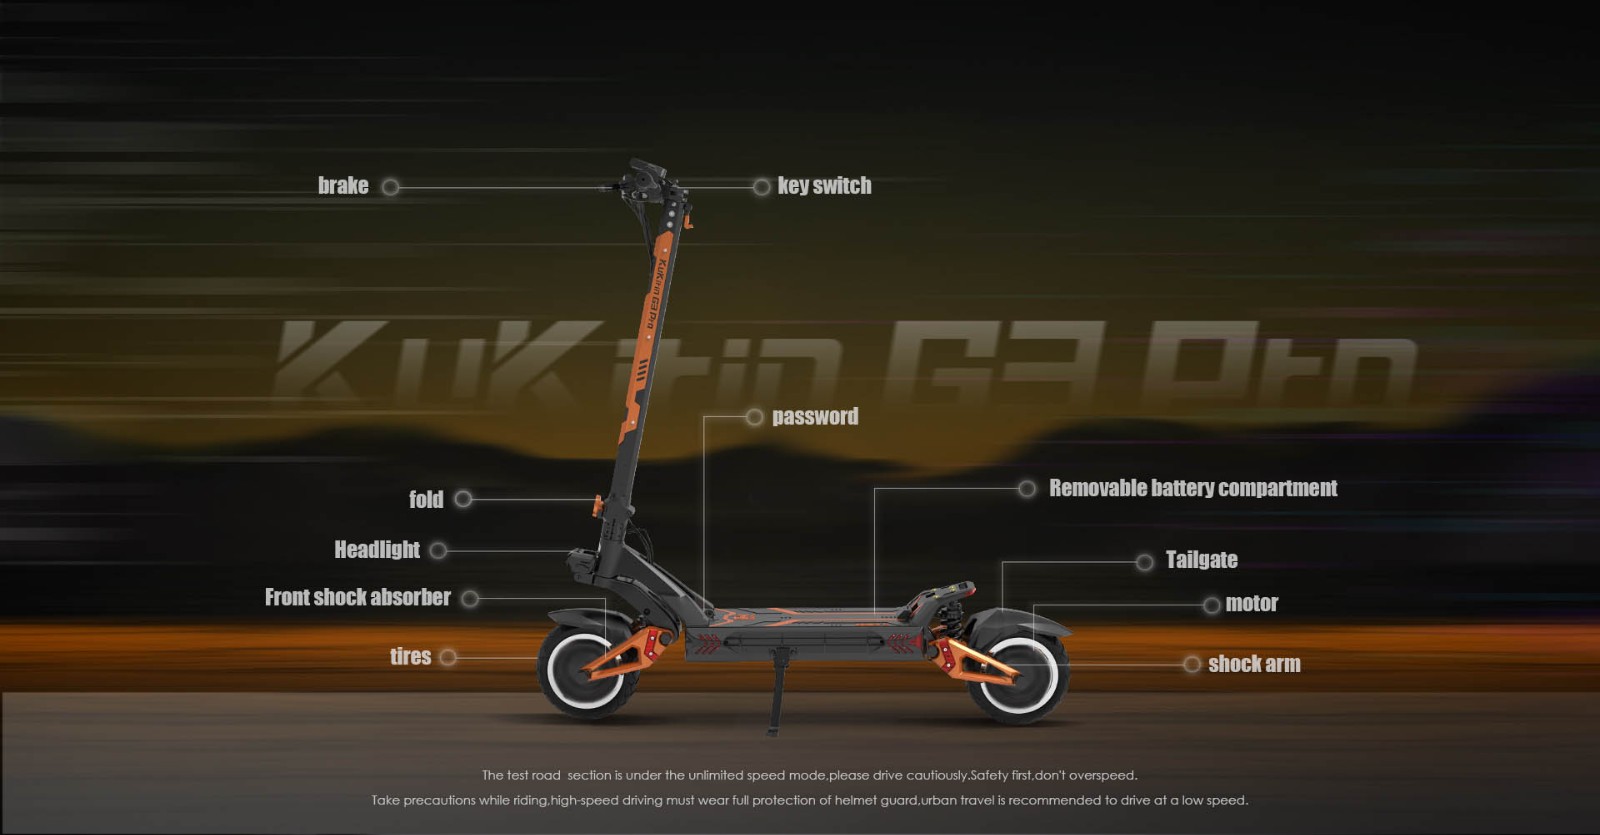 KuKirin G3 Pro 1200W*2 Motors Off-Road Electric Scooter 10 Inch Tires, 52V 23.2Ah Removable Battery, 80KM Top Range, 65Km/h Max Speed, Double Shock Absorber, IP54 Waterproof, Double Oil Brakes